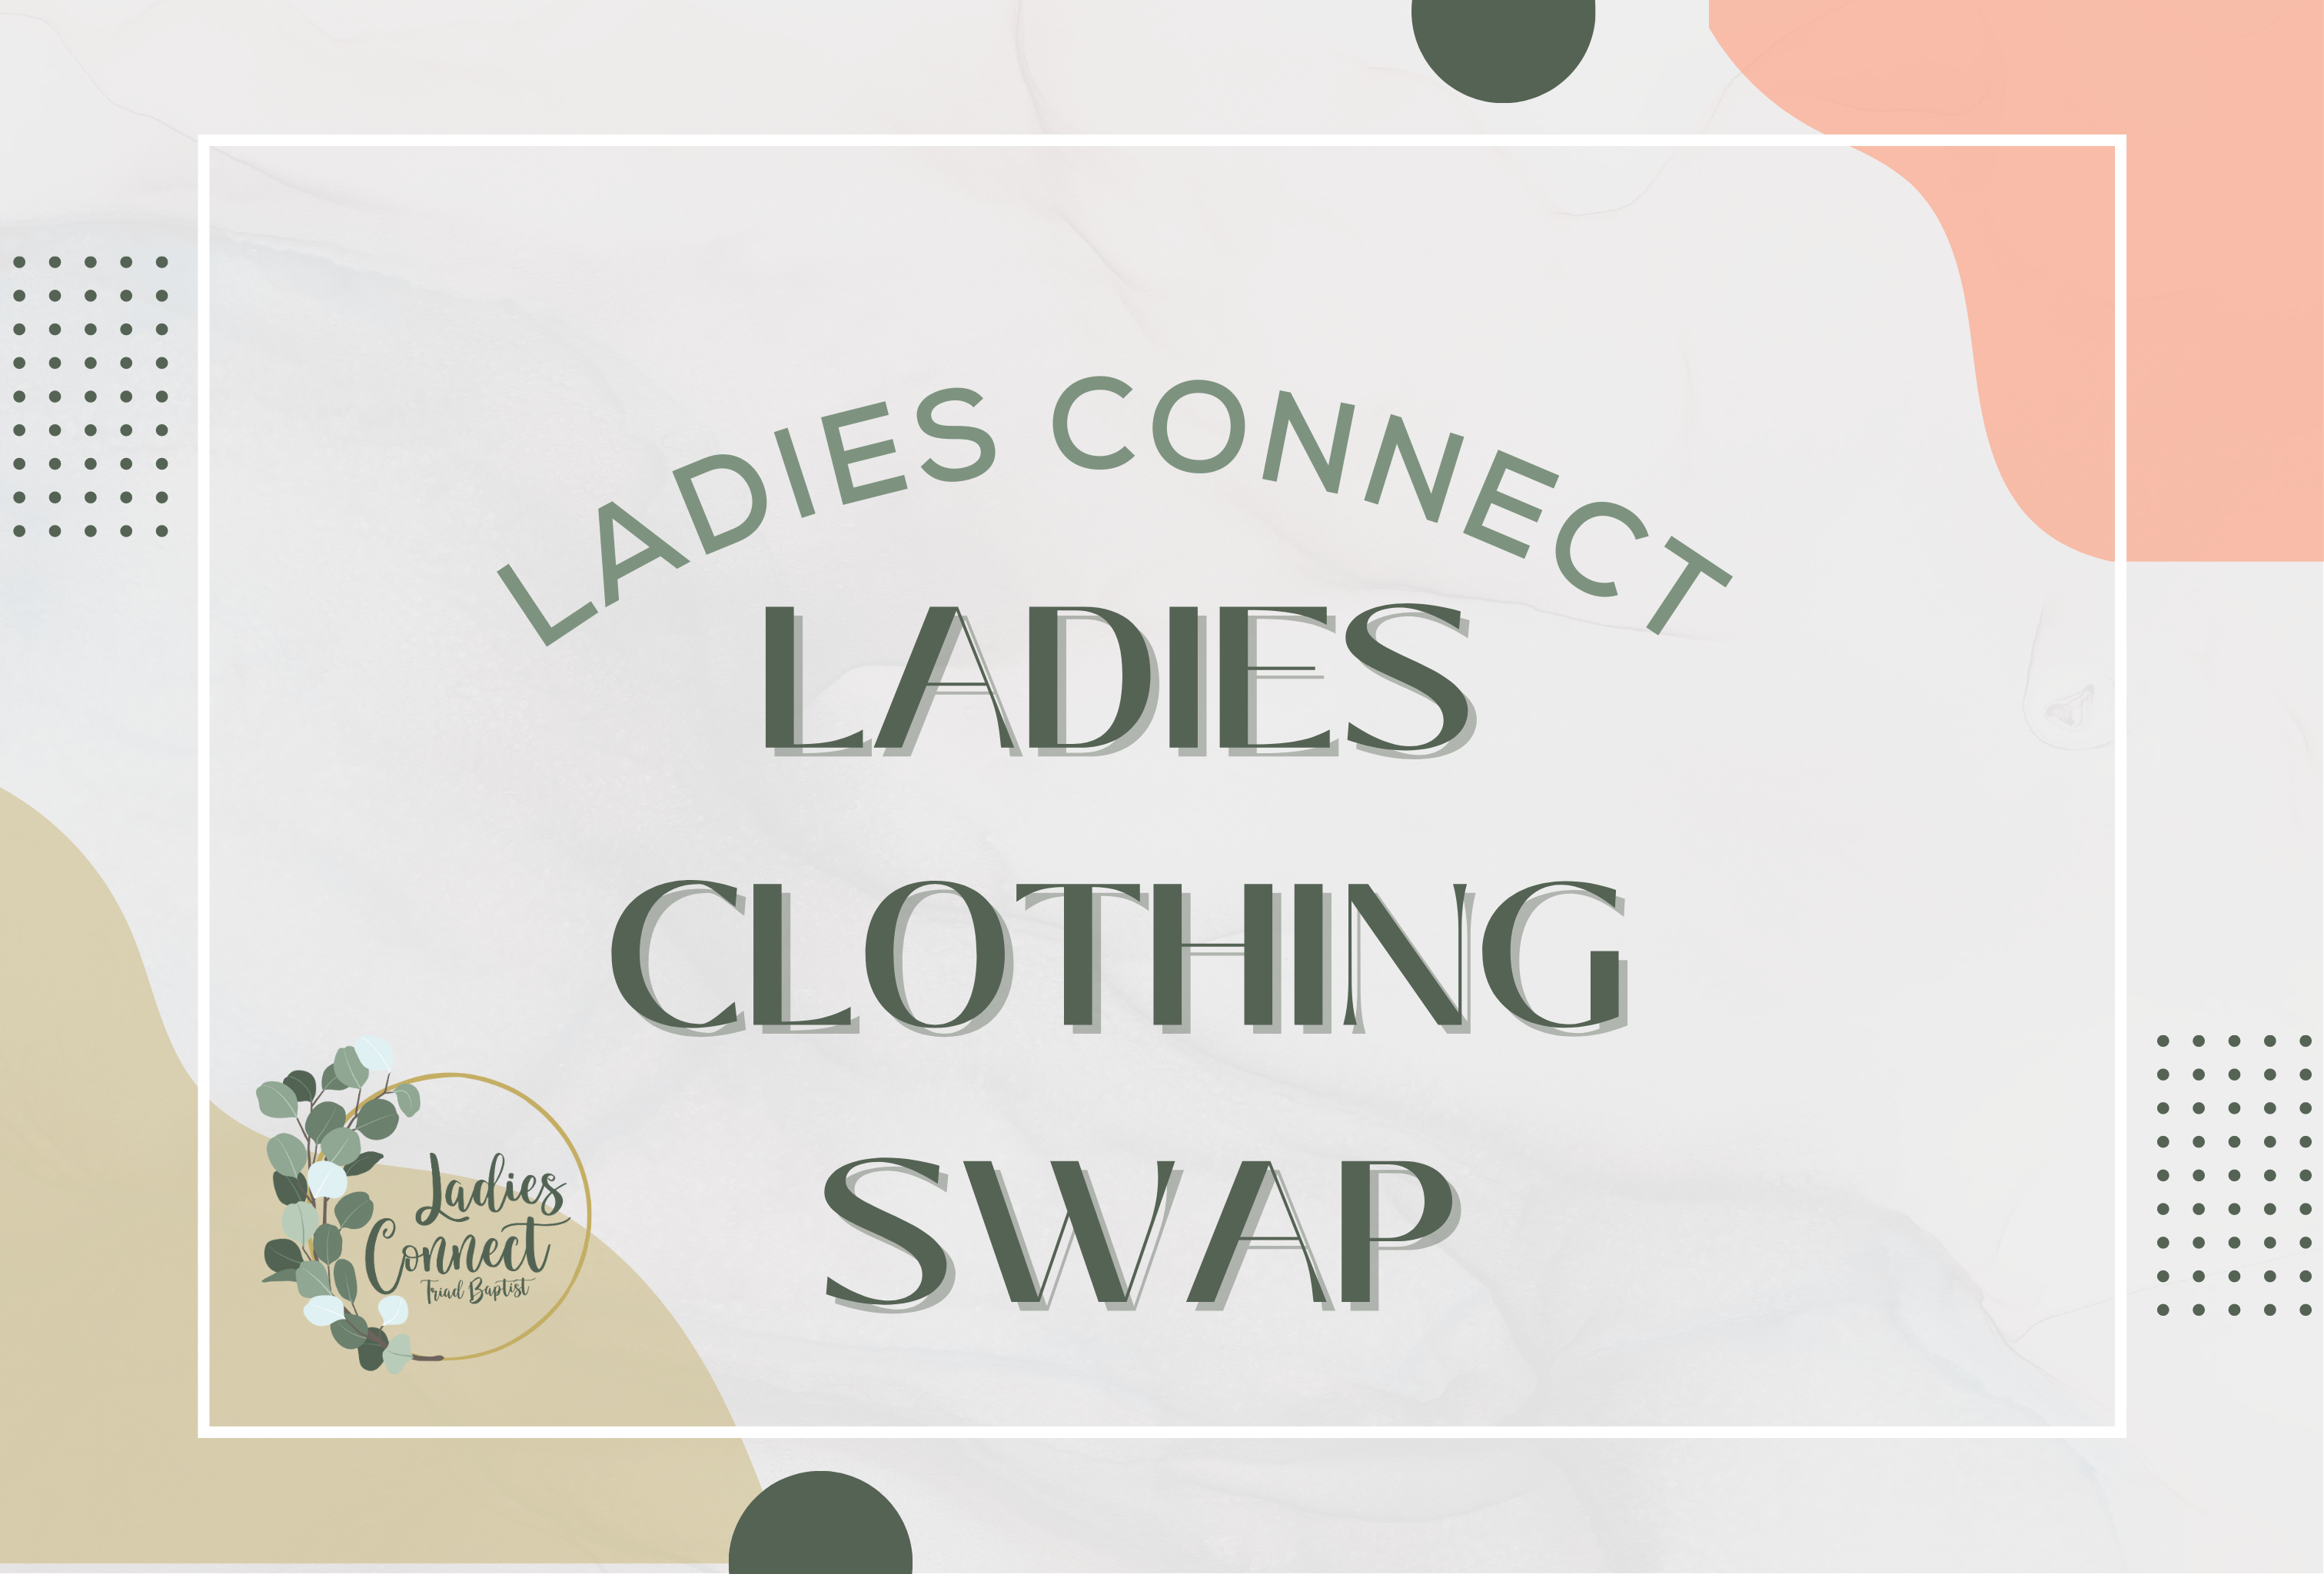 Ladies Connect Clothing swap 23 (6.2 × 4.2 in)